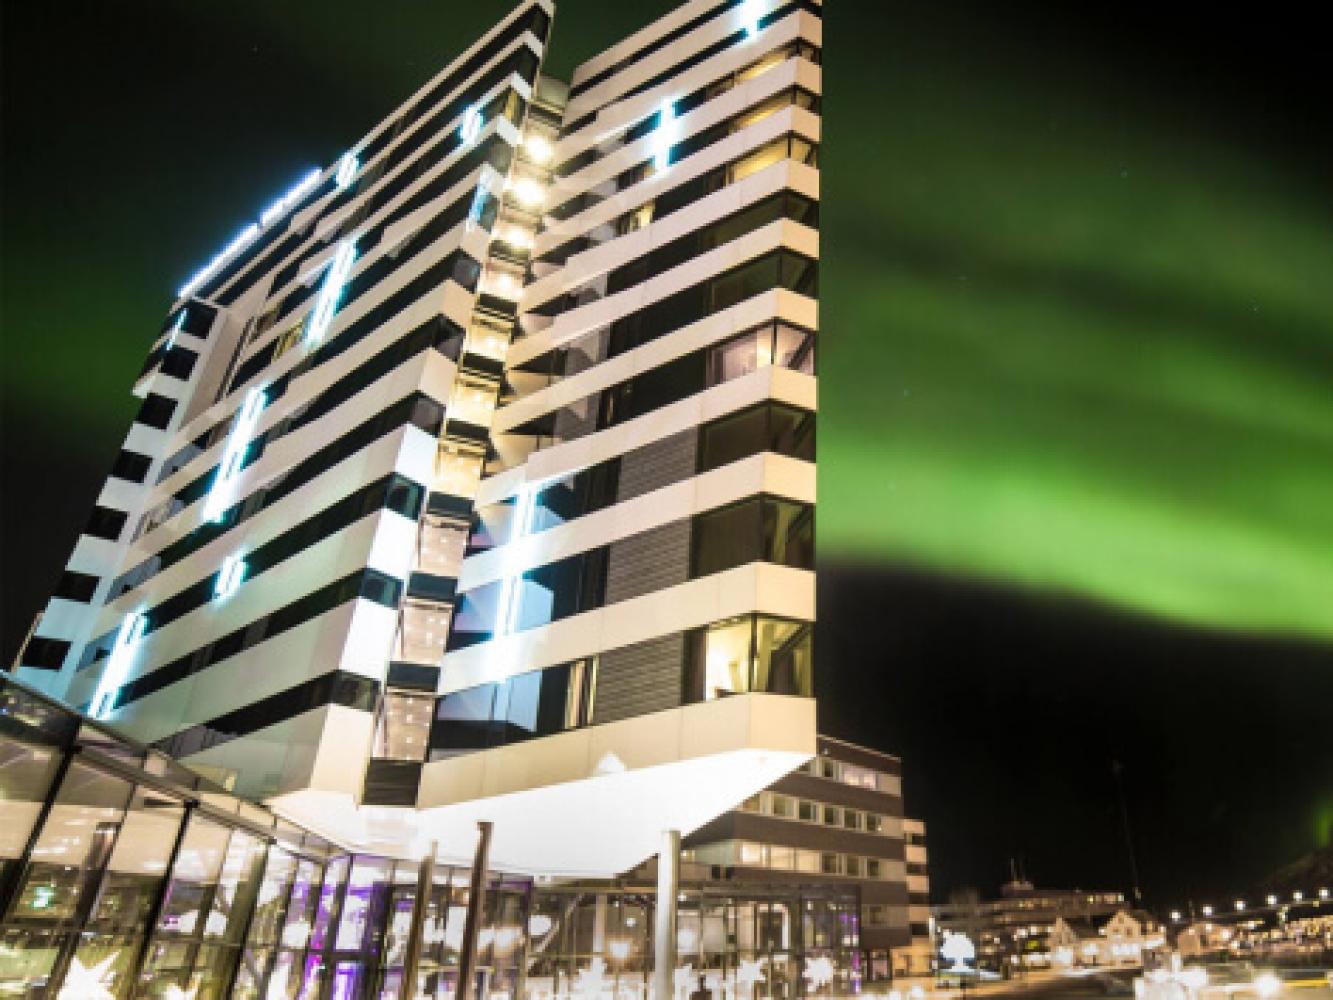 Clarion Hotel The Edge and northern lights in Tromso